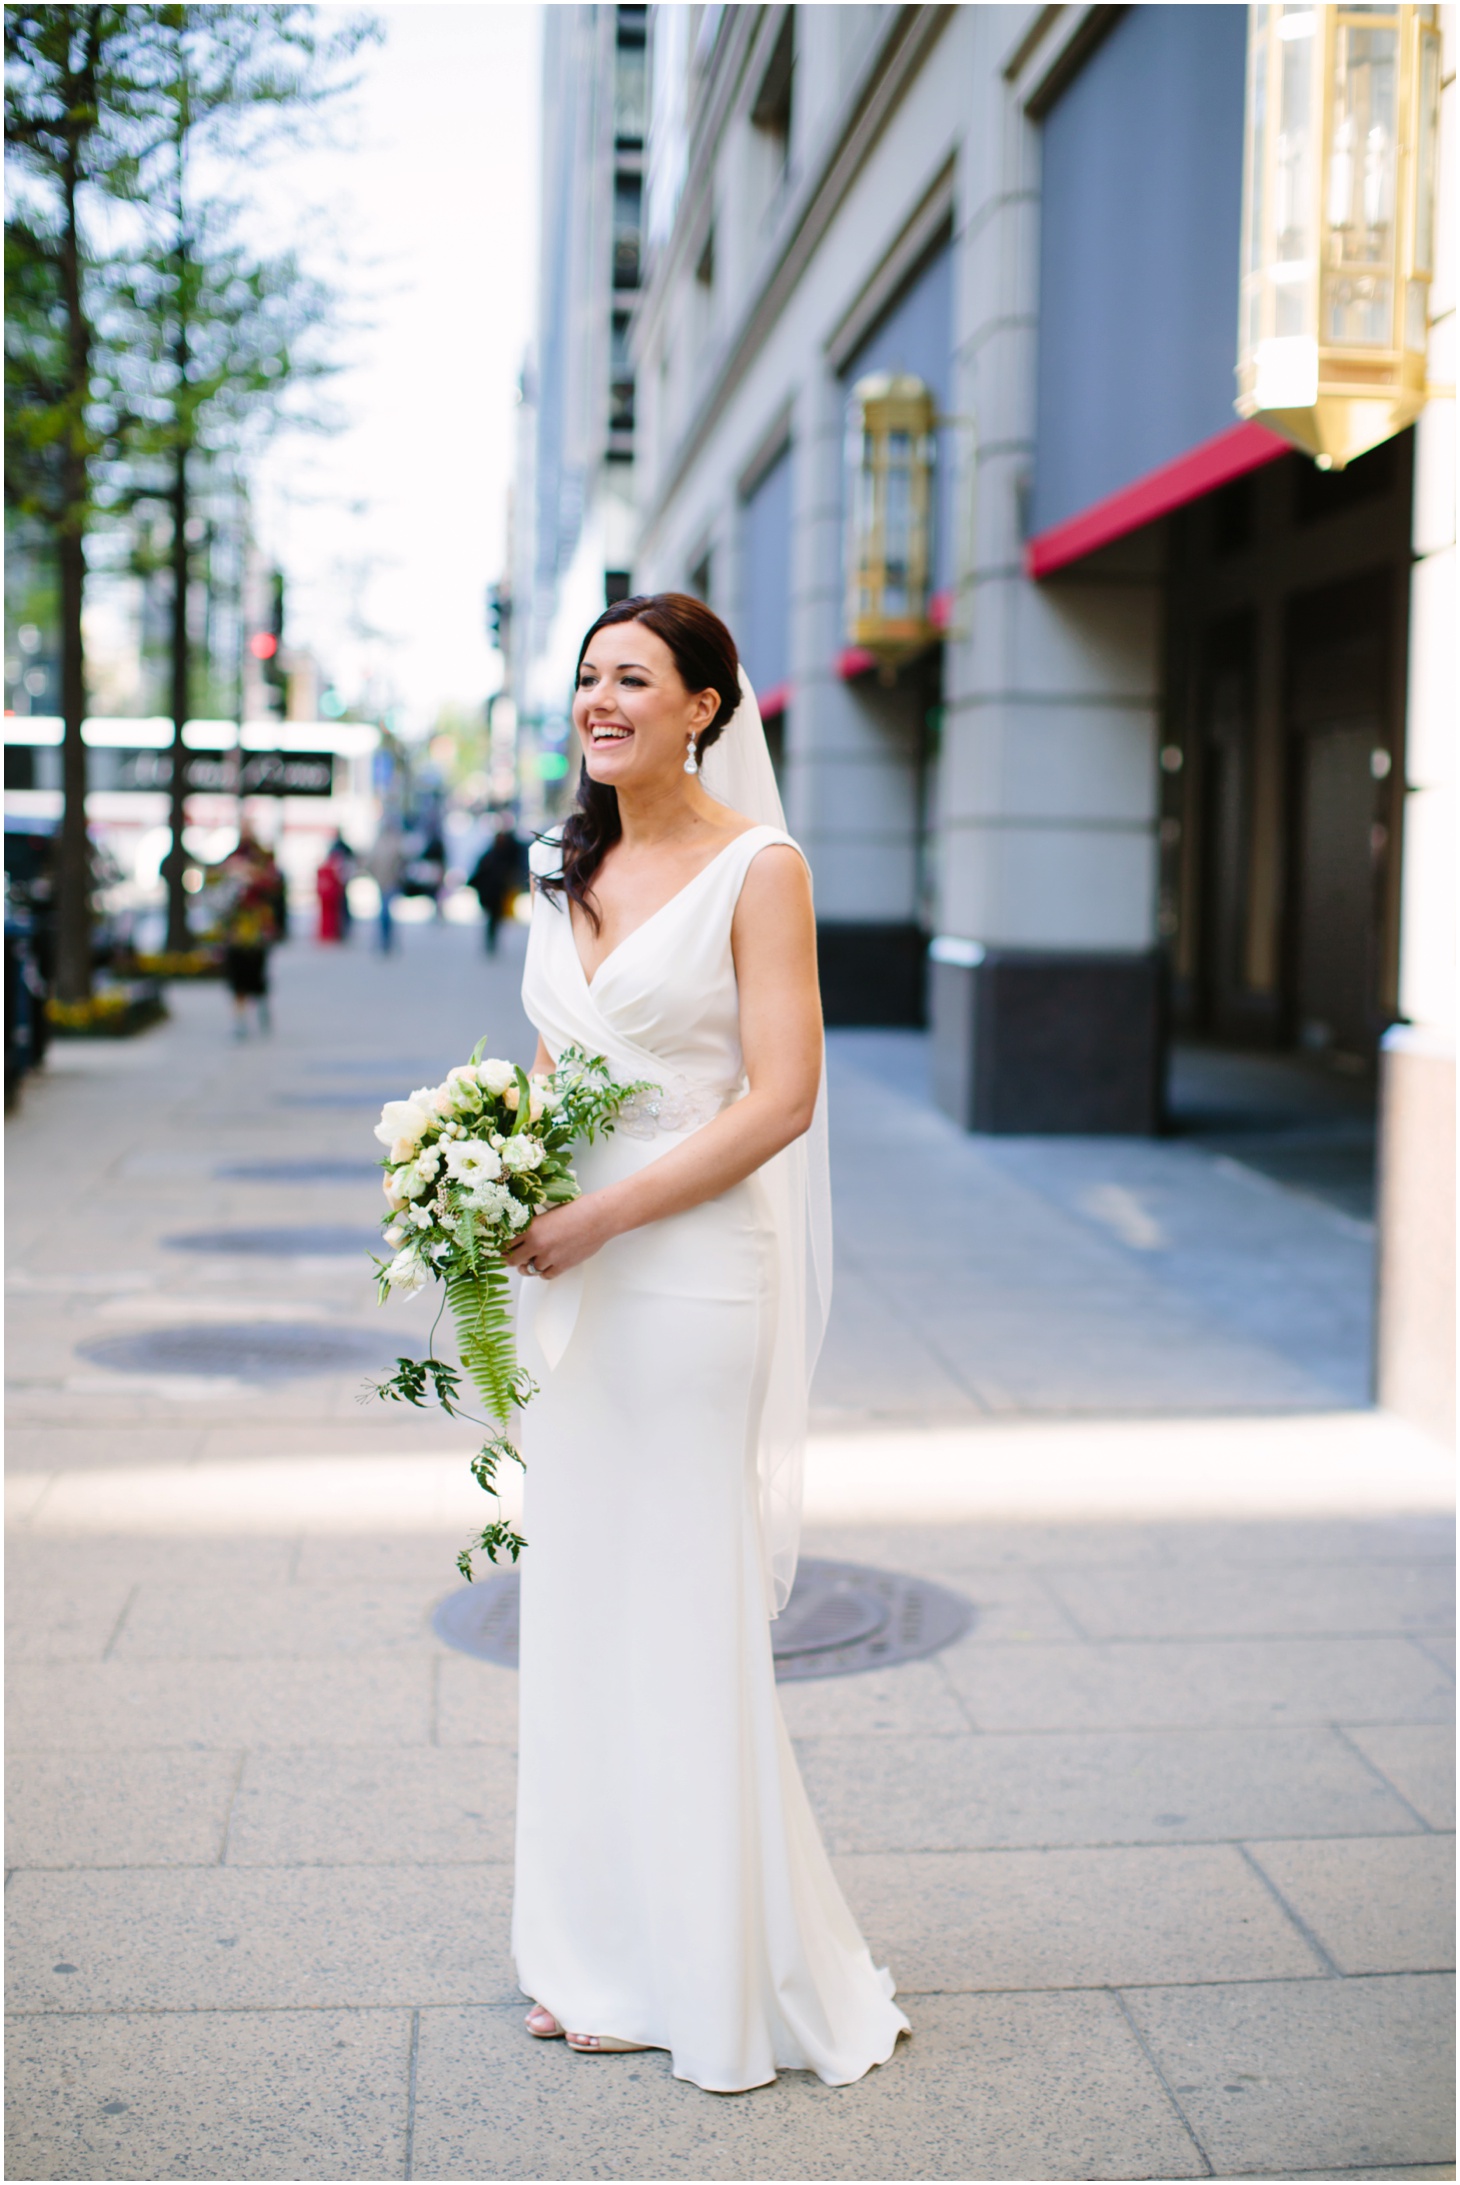 Mikey & Megan, Downtown DC Wedding at National Museum of Women in the Arts by Sarah Bradshaw Photography_0020.jpg